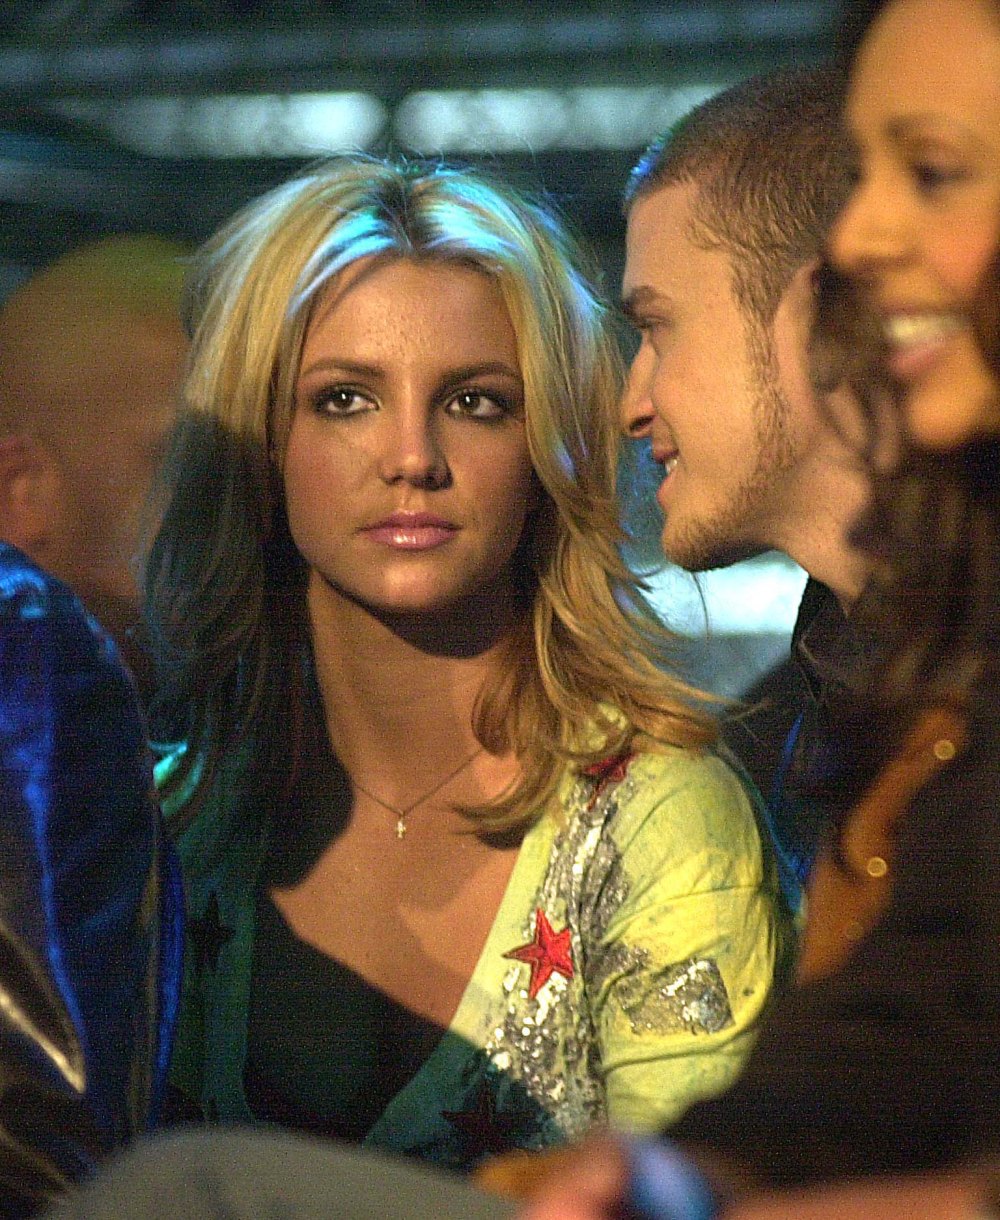 Britney Spears Says Justin Timberlake Had Power Over Her Post-Breakup